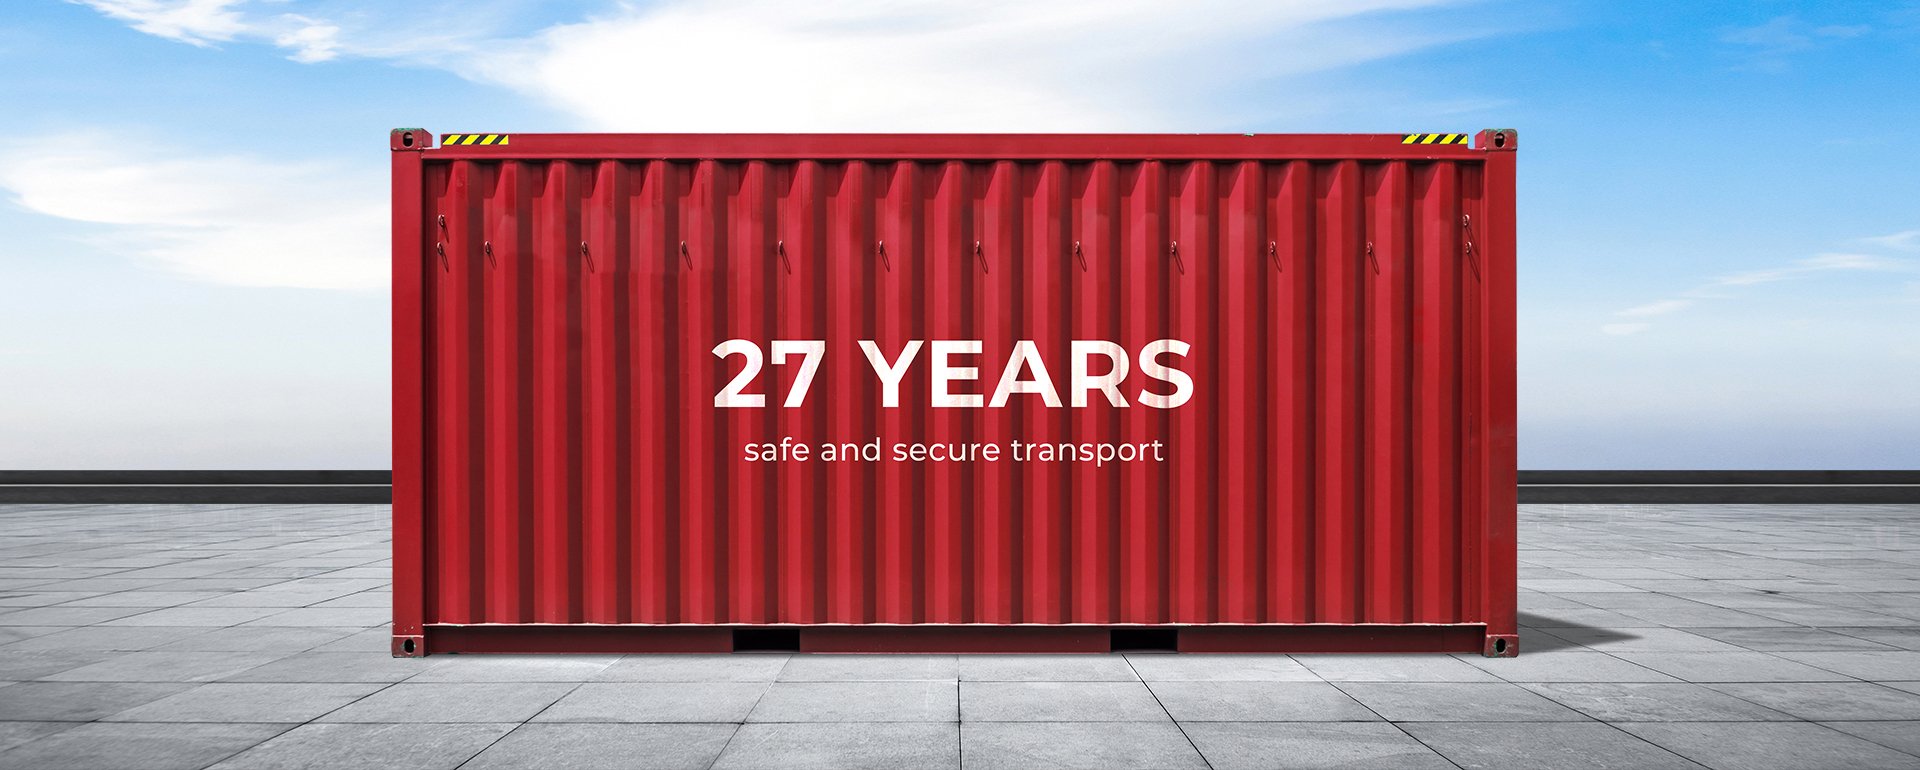 27 years of secure and guarantee transport